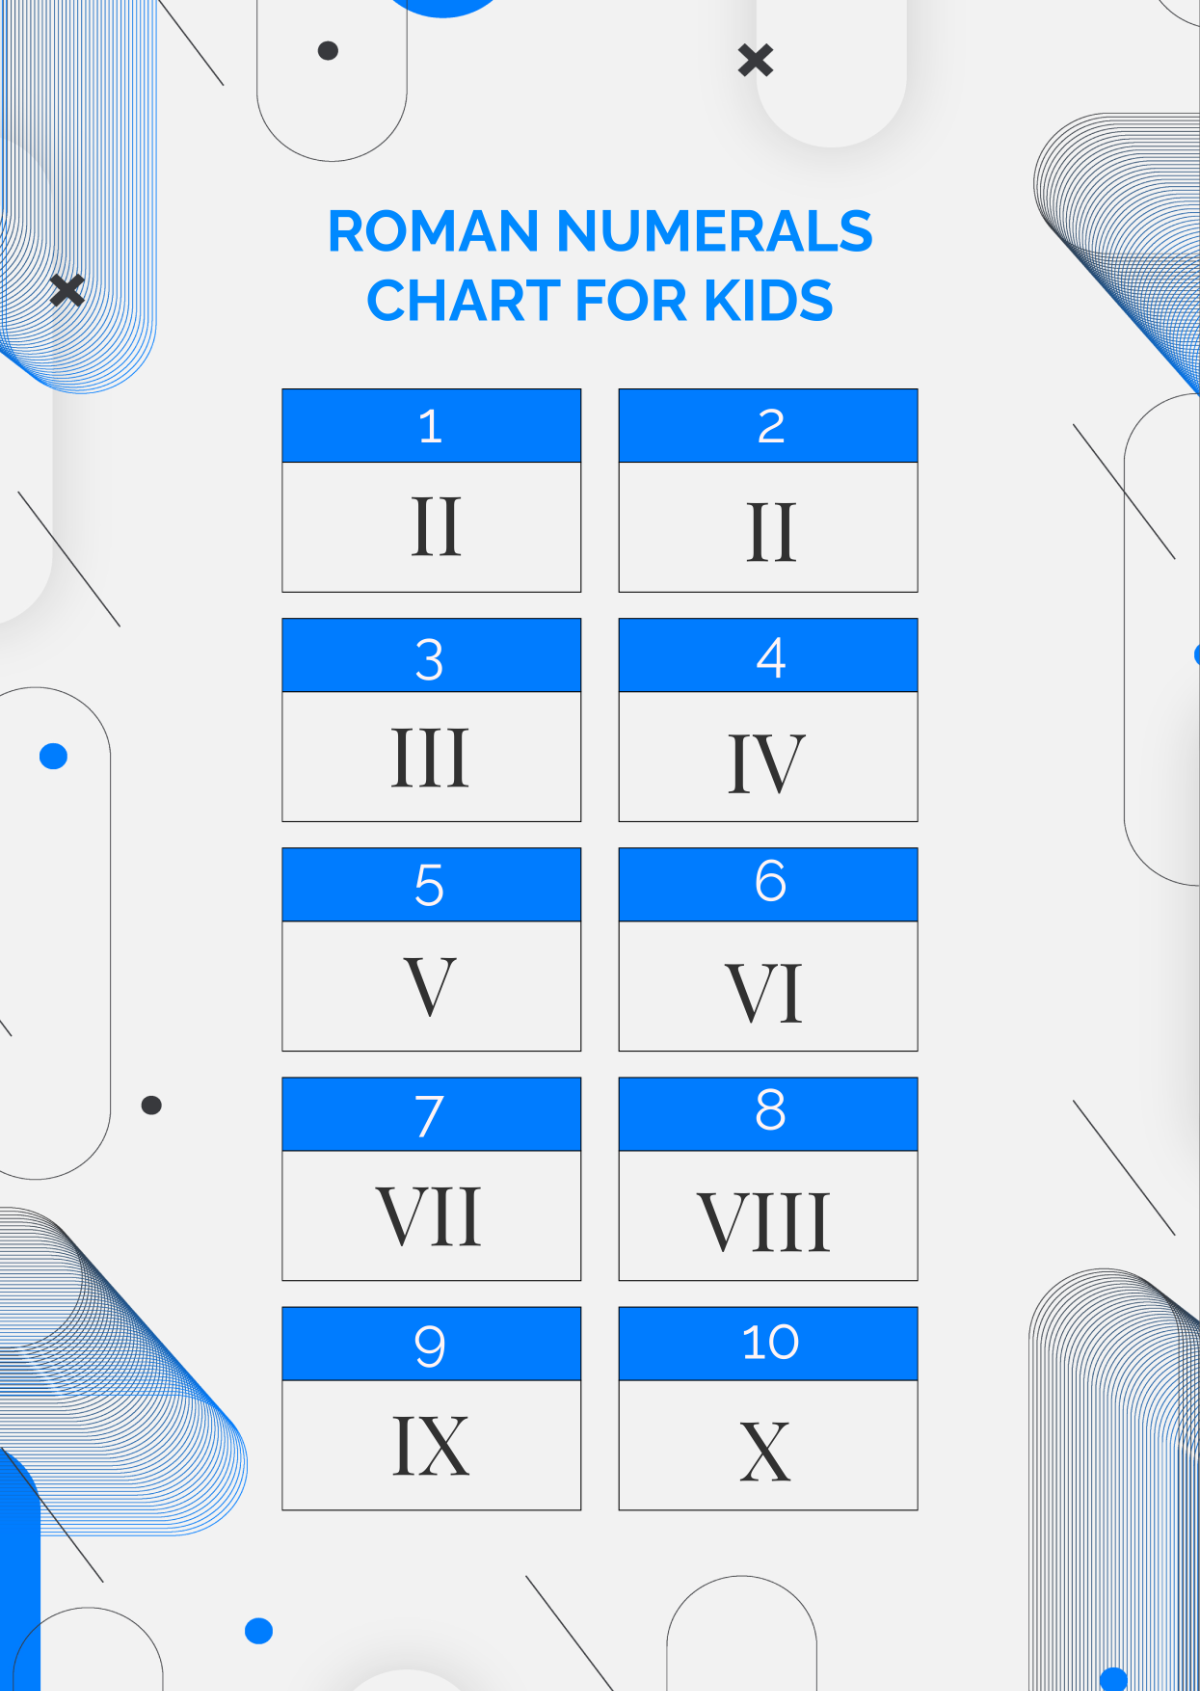 Roman Numerals Chart for Kids